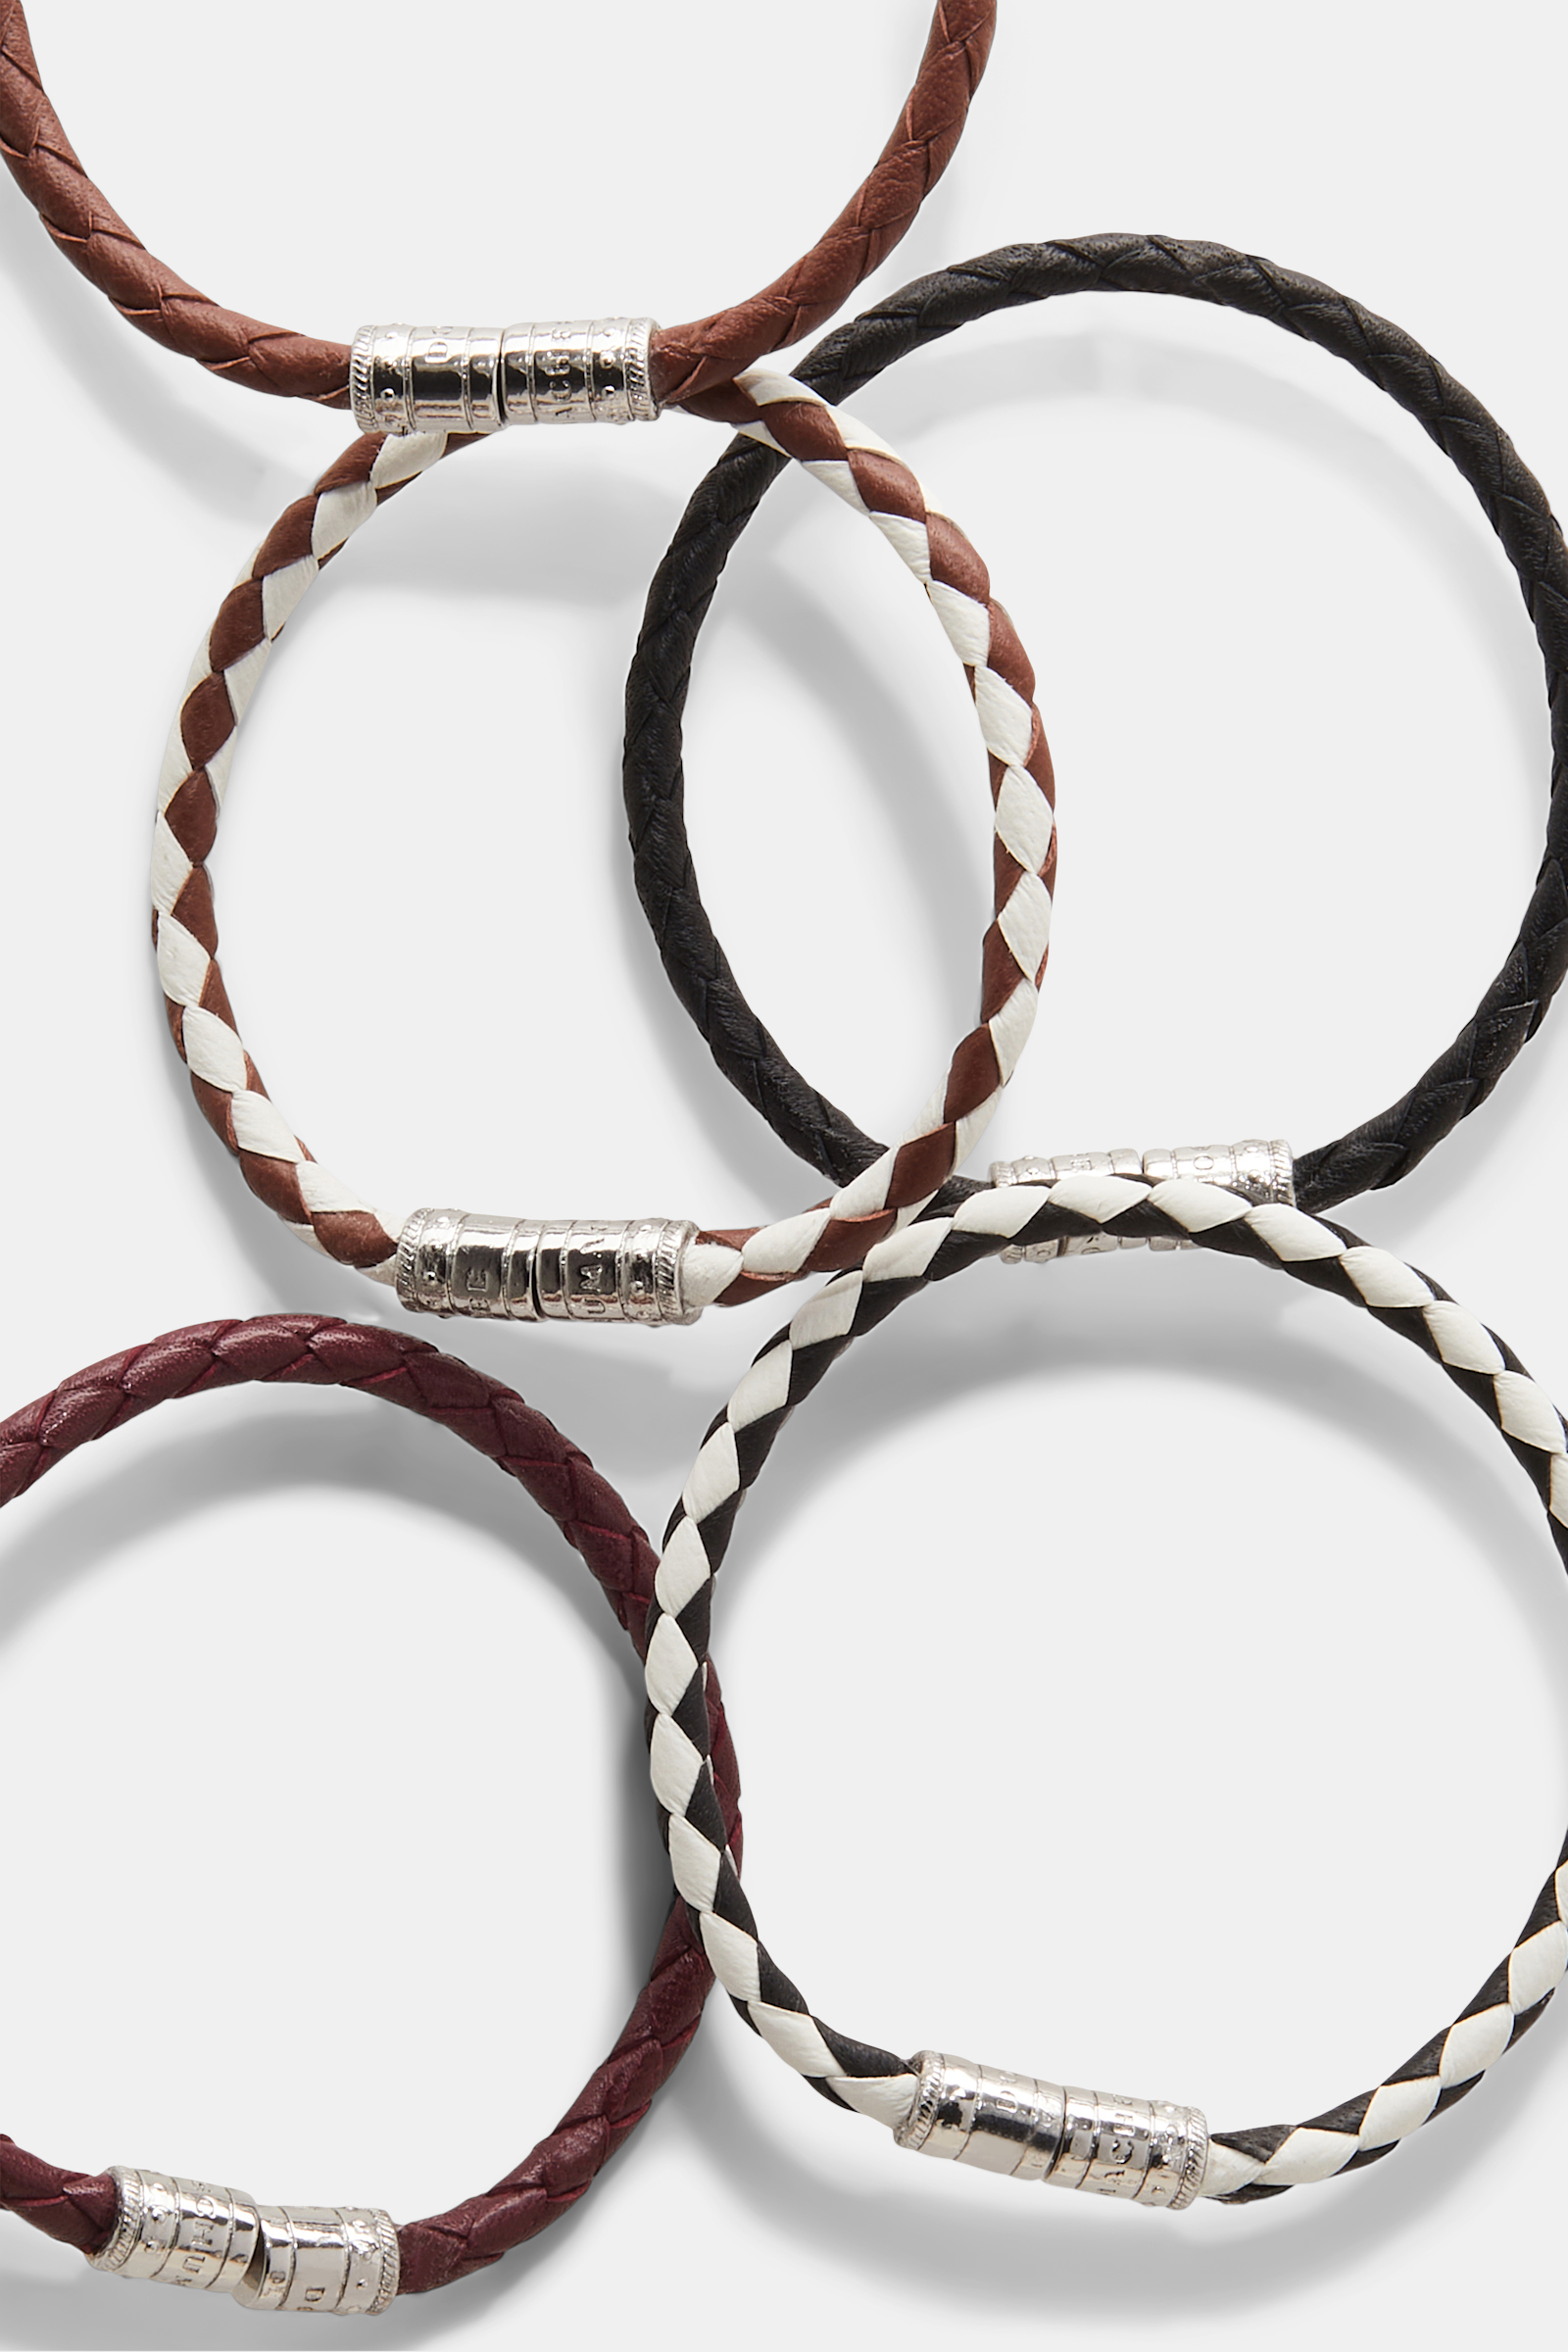 Dorothee Schumacher Set of three woven leather cord bracelets cognac + white with bordeaux mix